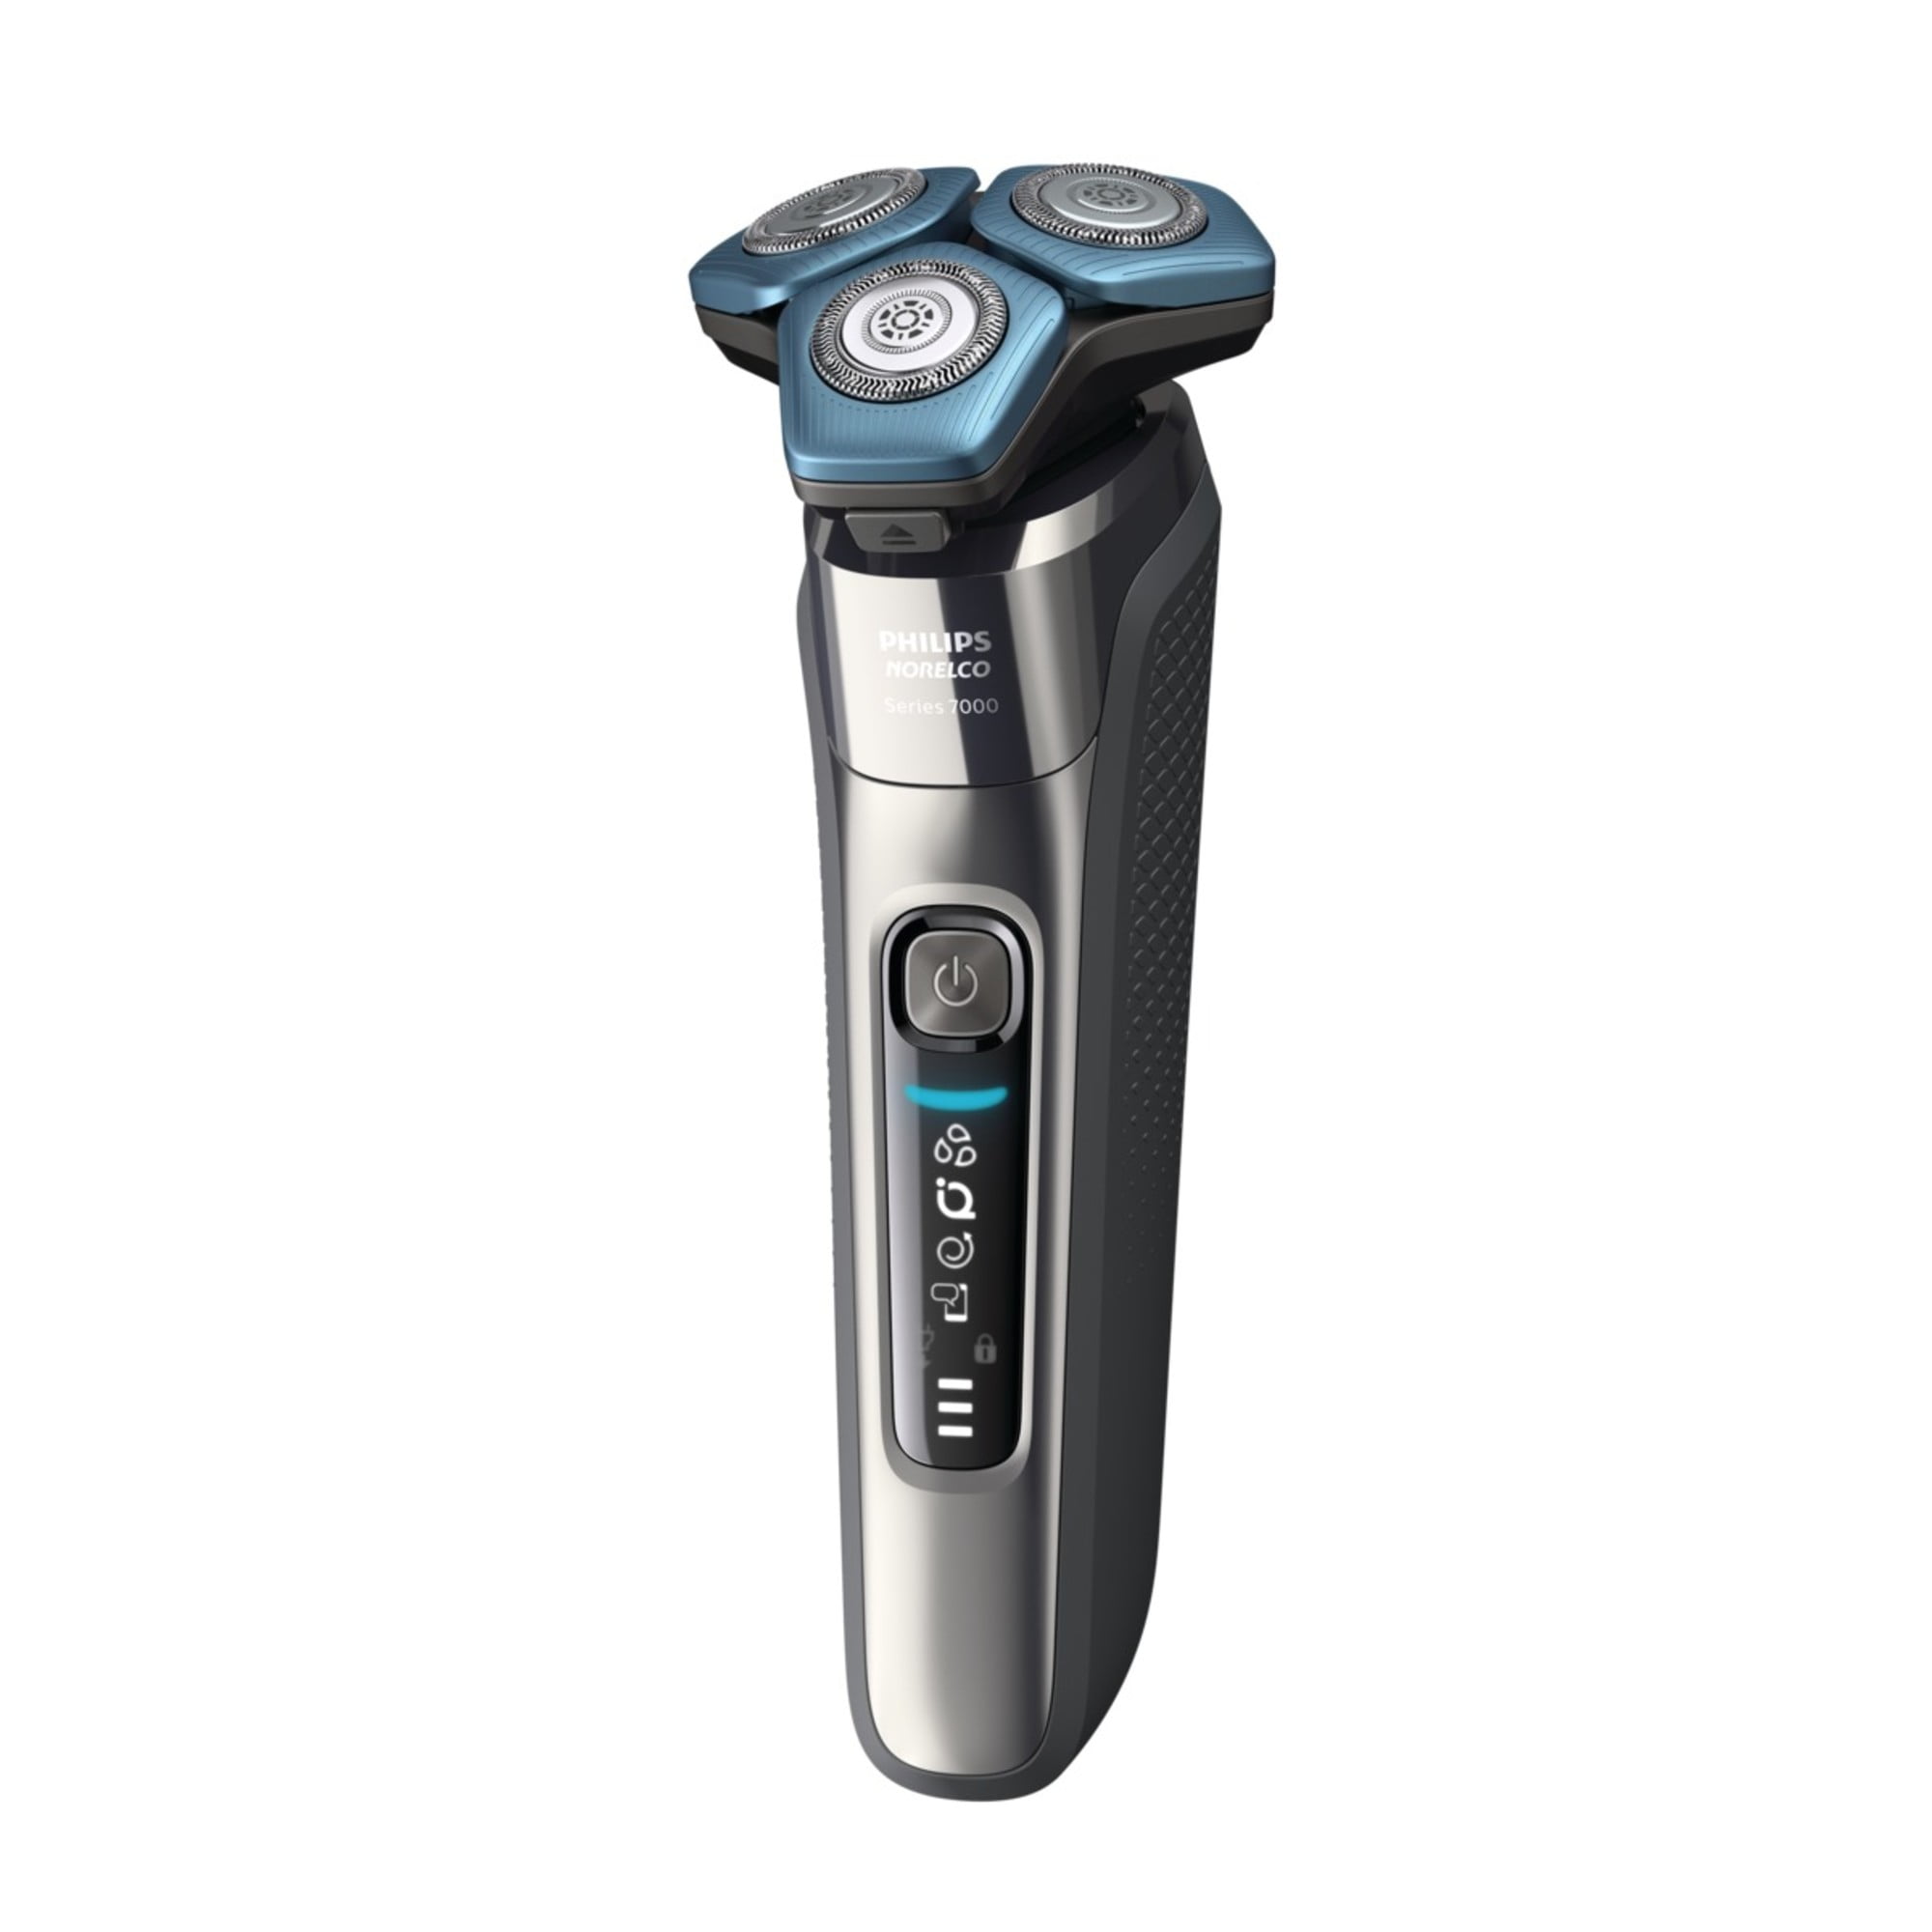 Philips Norelco Shaver 8900 Rechargeable Wet/Dry Electric Shaver Review -  LuxClout.com 